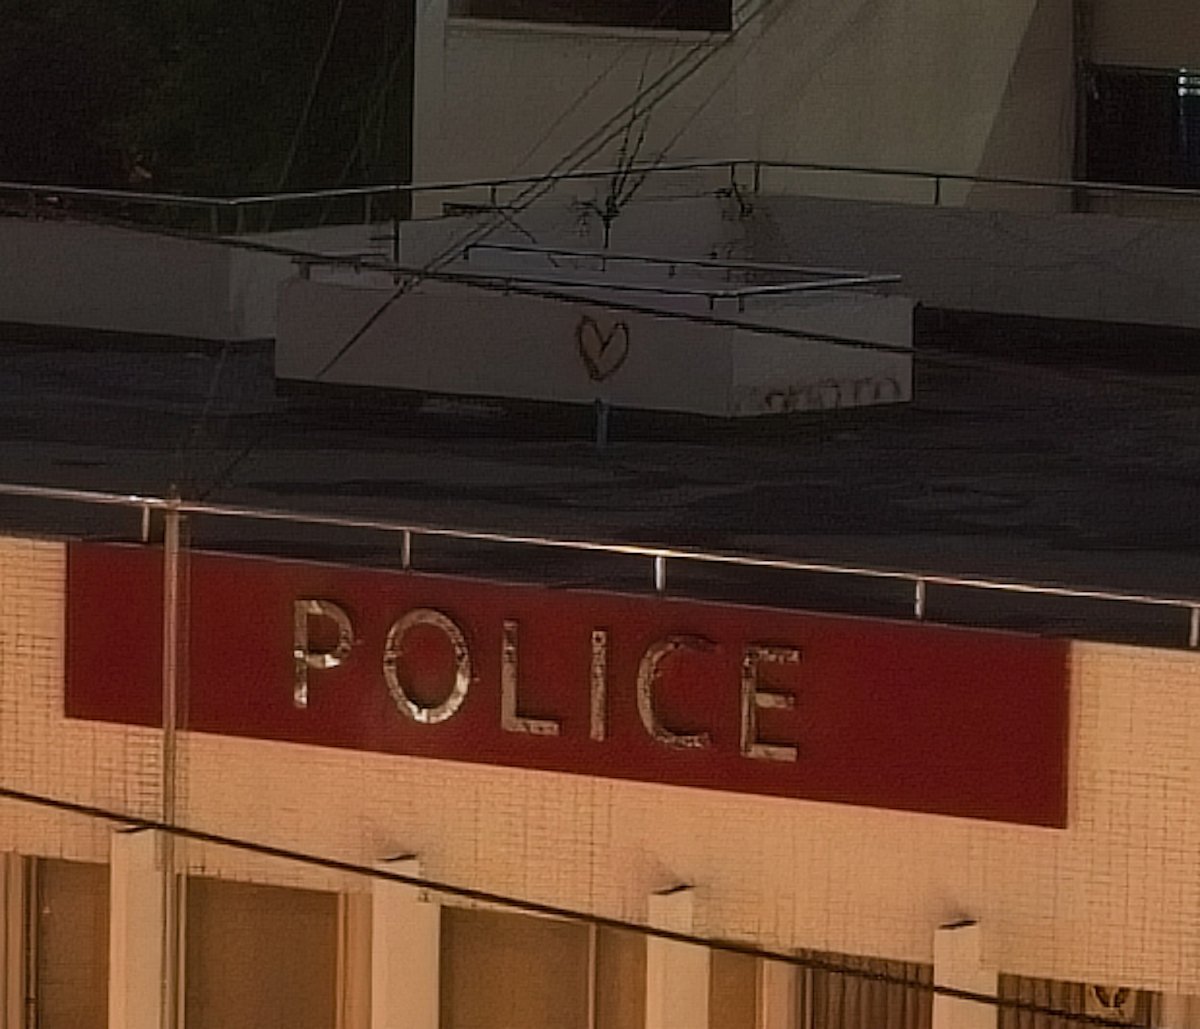 ON1 image of rooftop and police sign with noise reduction